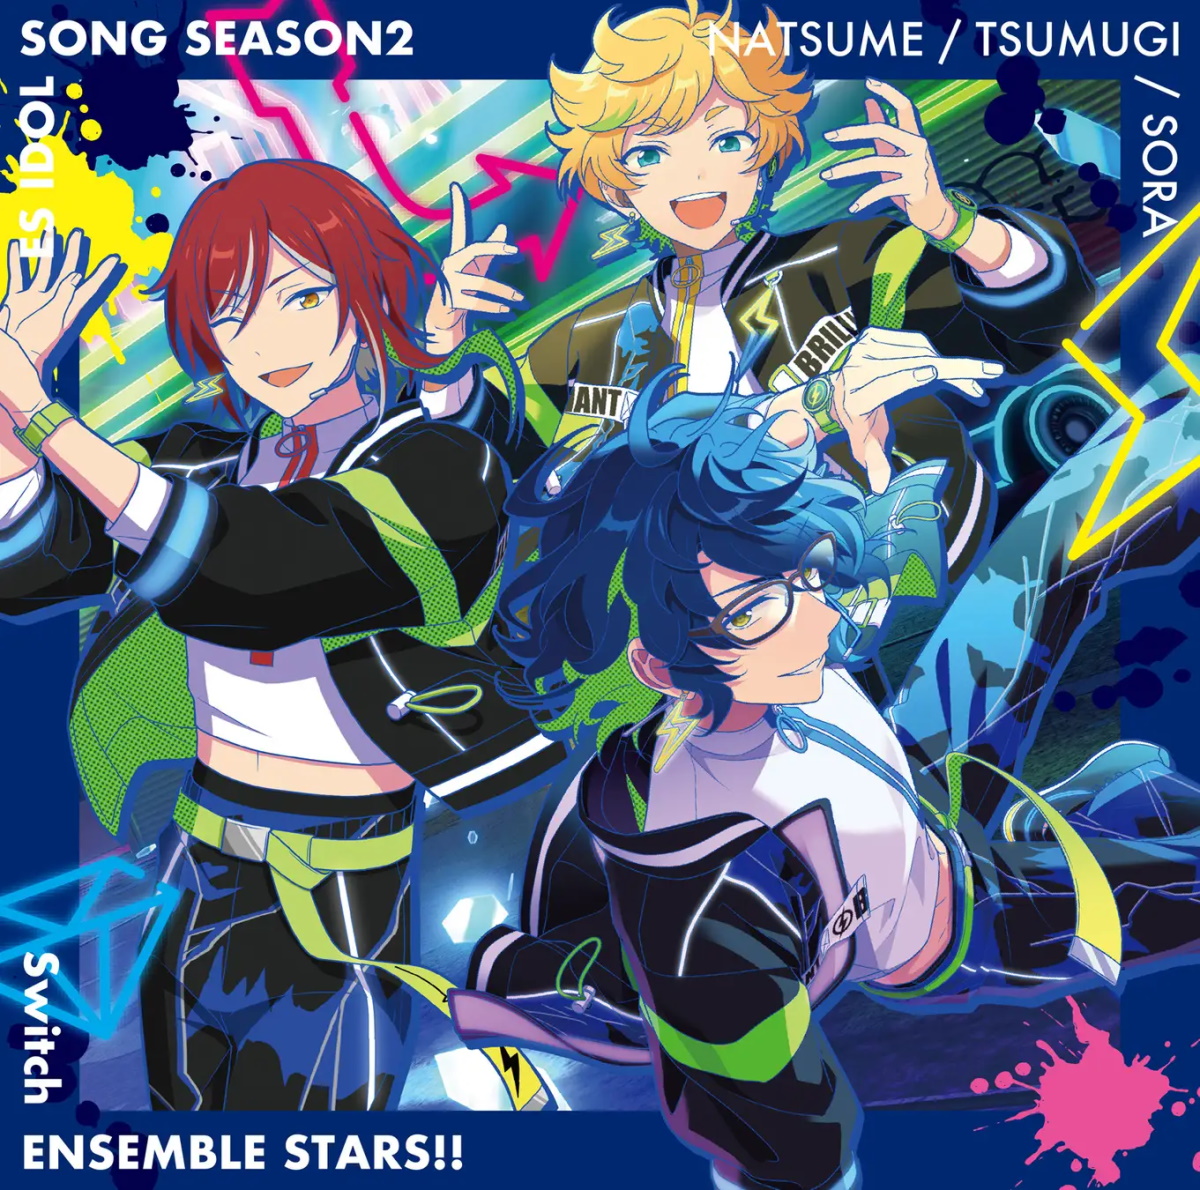 Cover for『Switch - A little bit UP!!』from the release『Ensemble Stars!! ES Idol Song season2 Brilliant Smile』